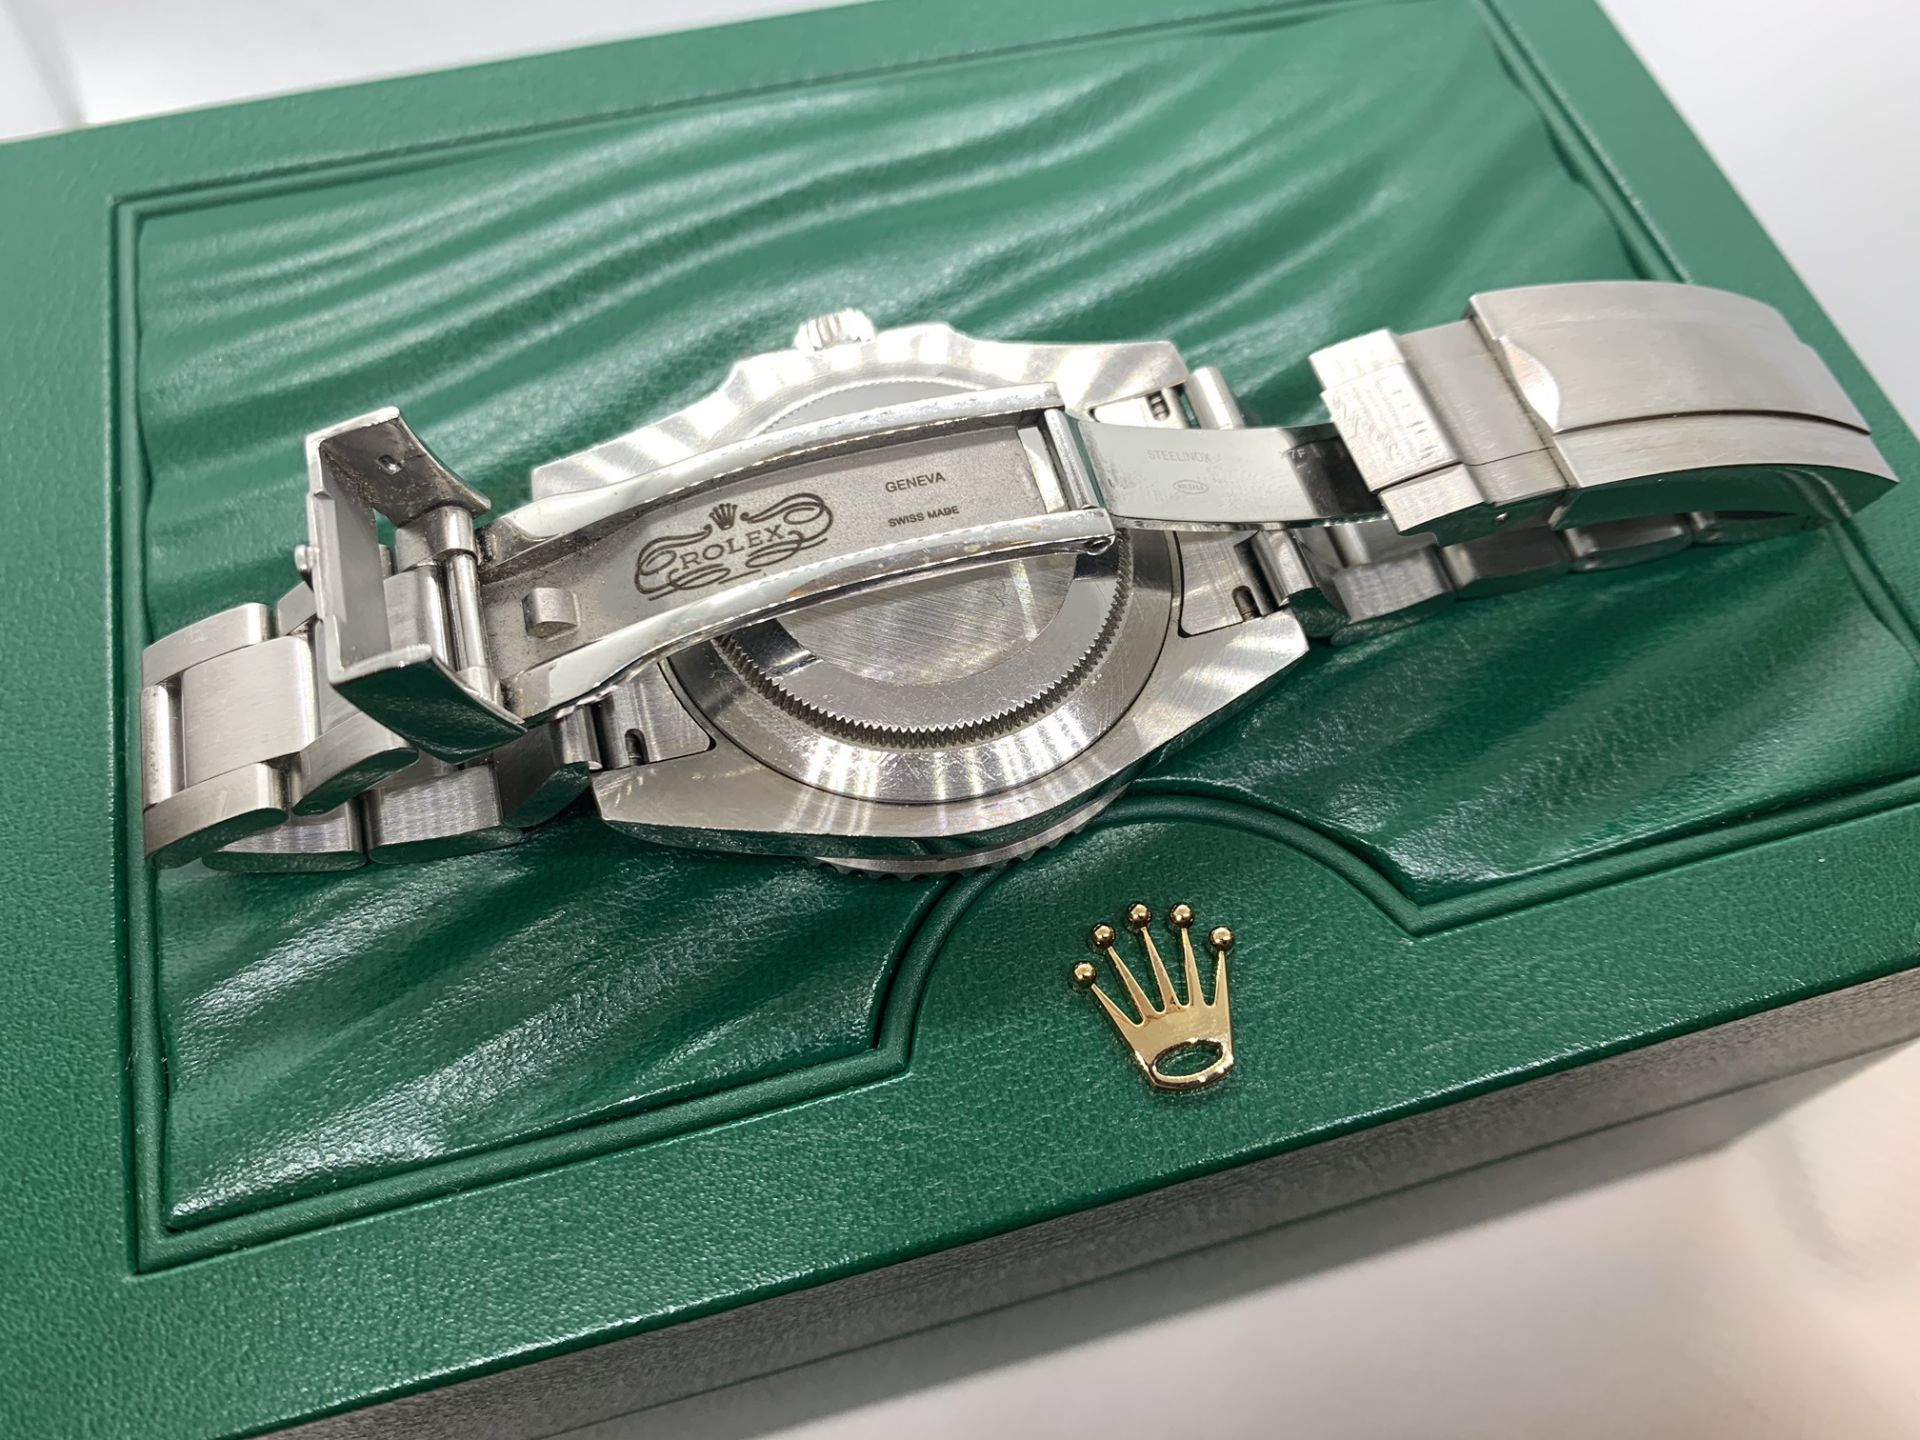 ROLEX SUBMARINER 3135 MOVEMENT WITH S/S METAL WATCH CASE - Image 6 of 13